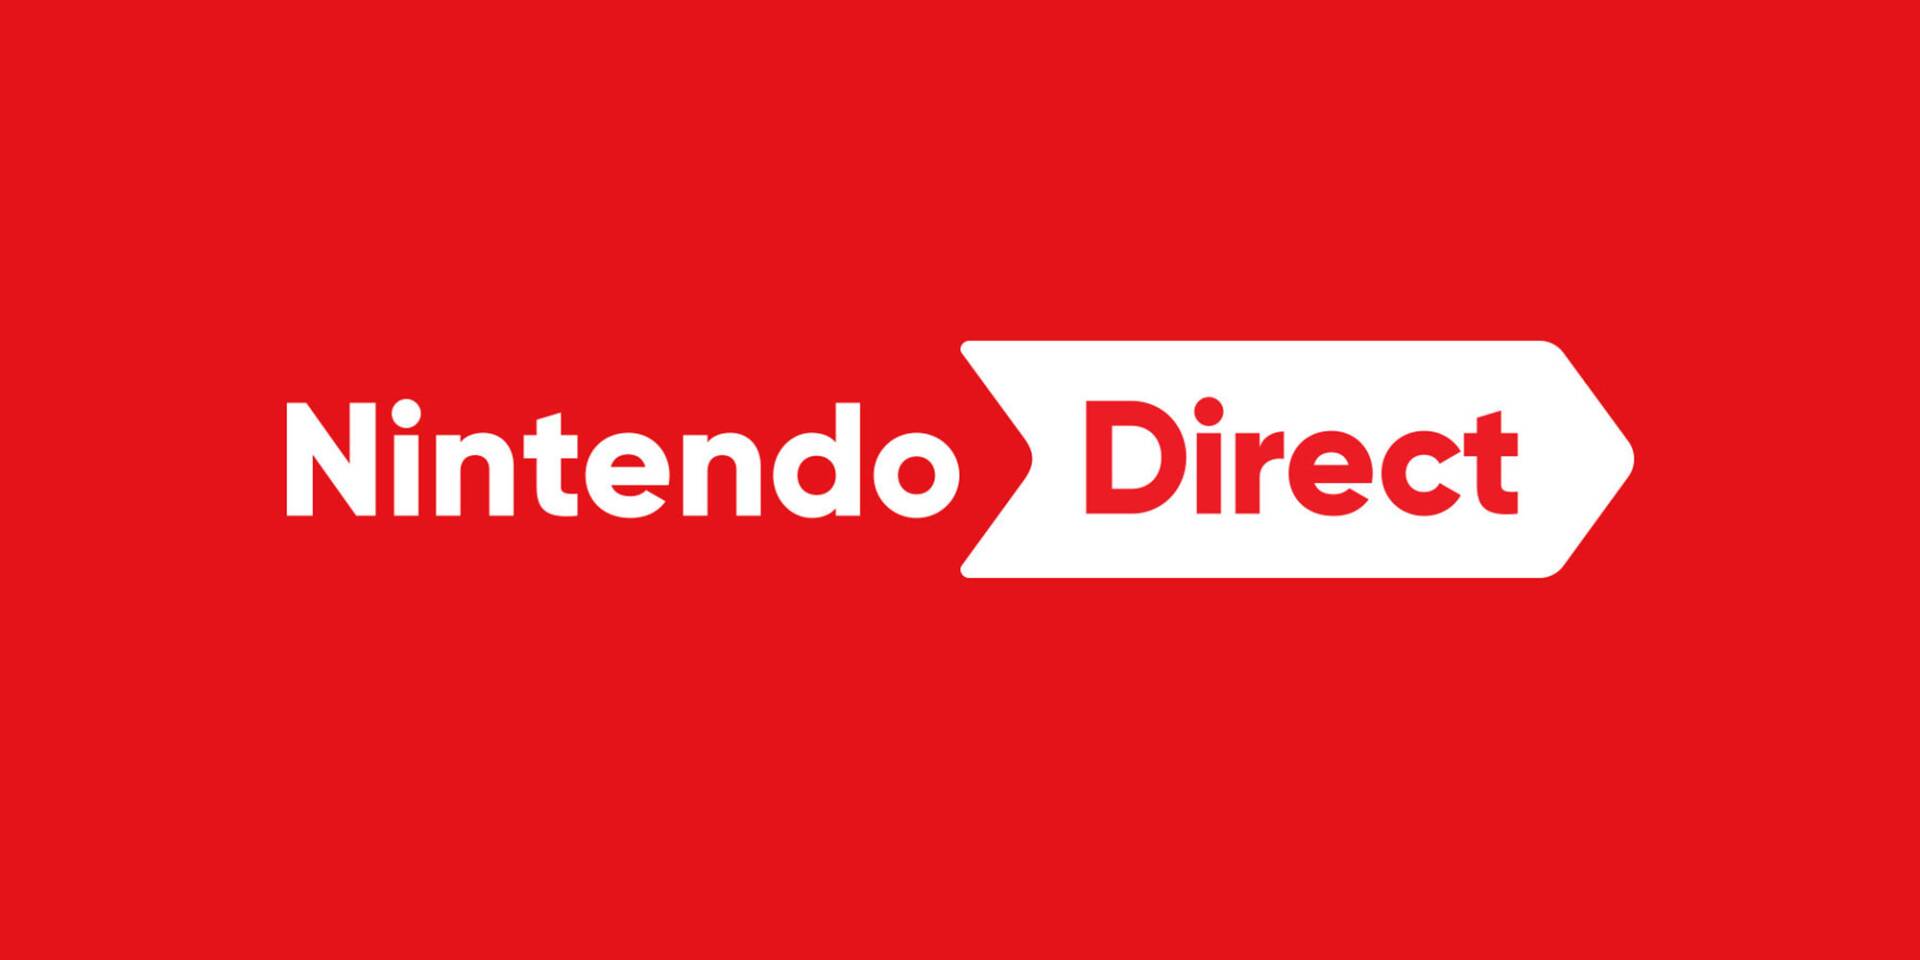 Nintendo Direct, where you can follow the event in Italian